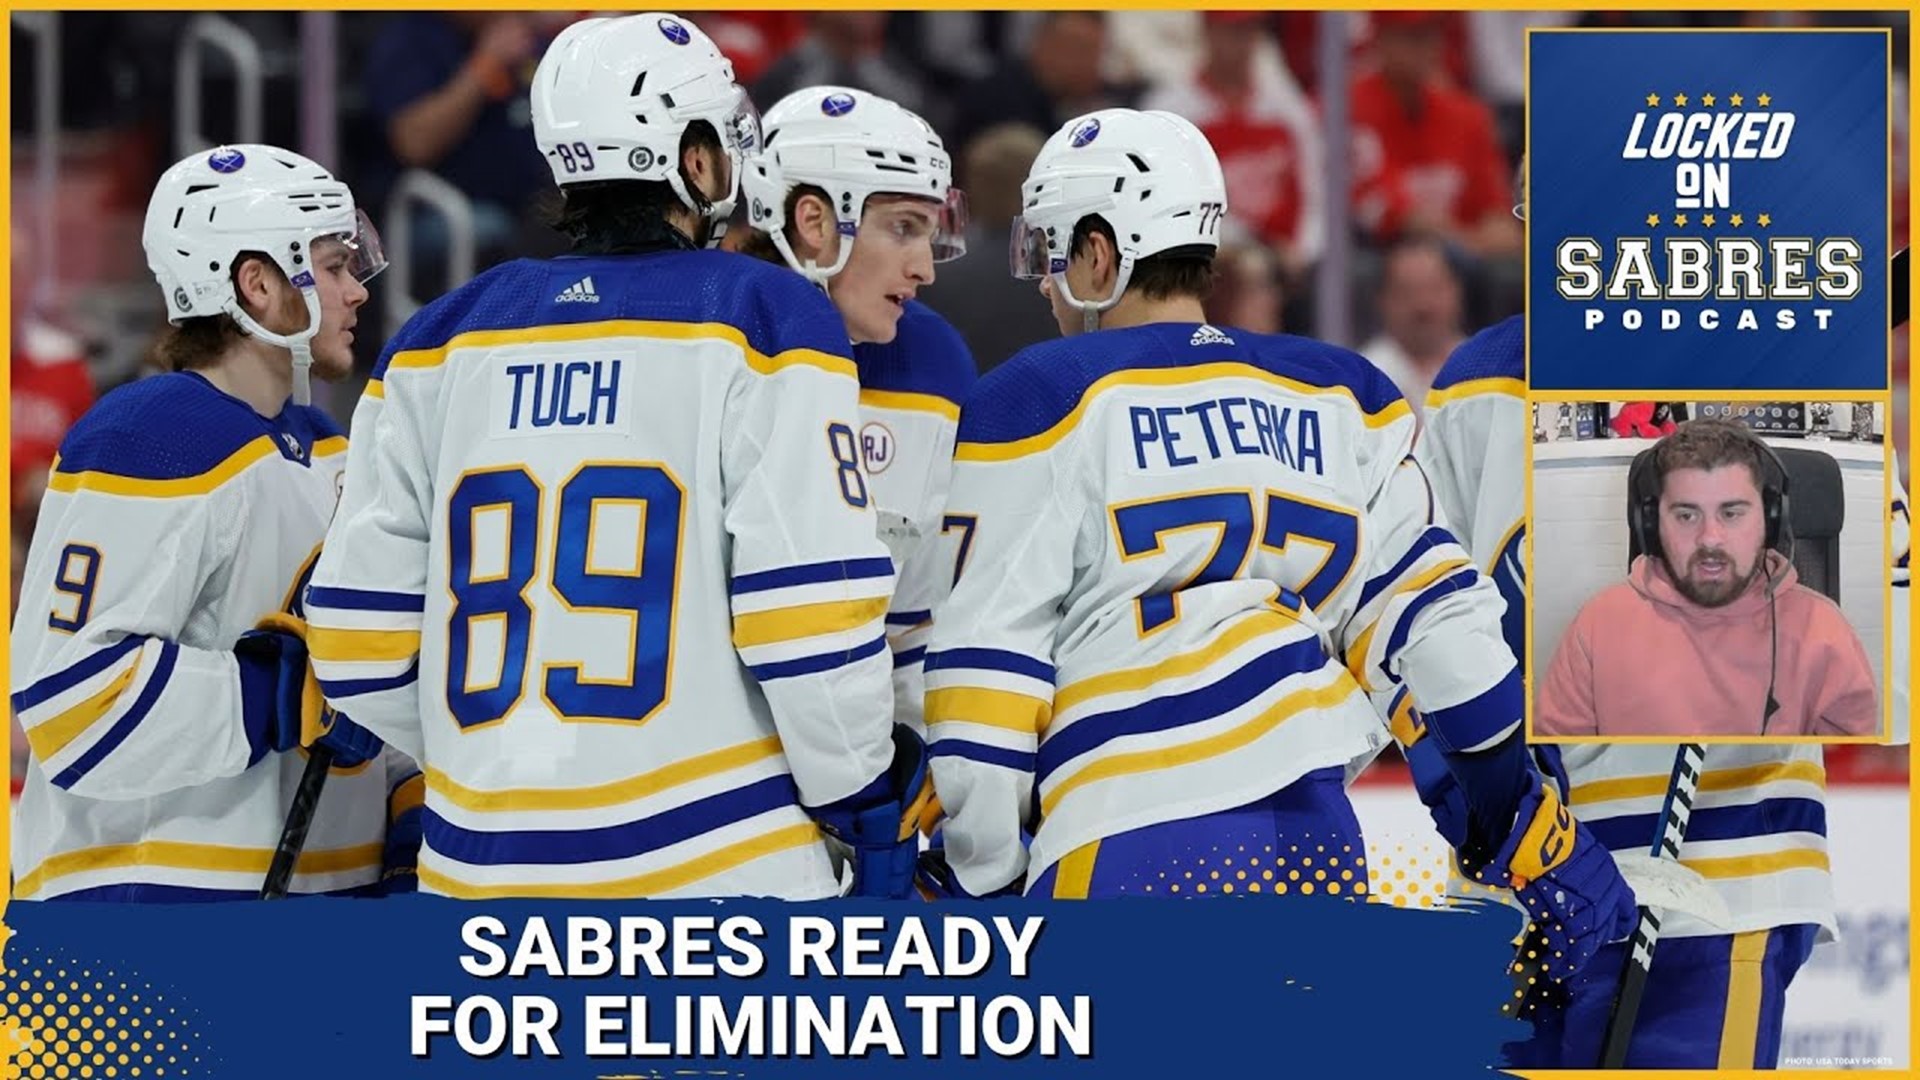 Sabres ready to be put out of their misery